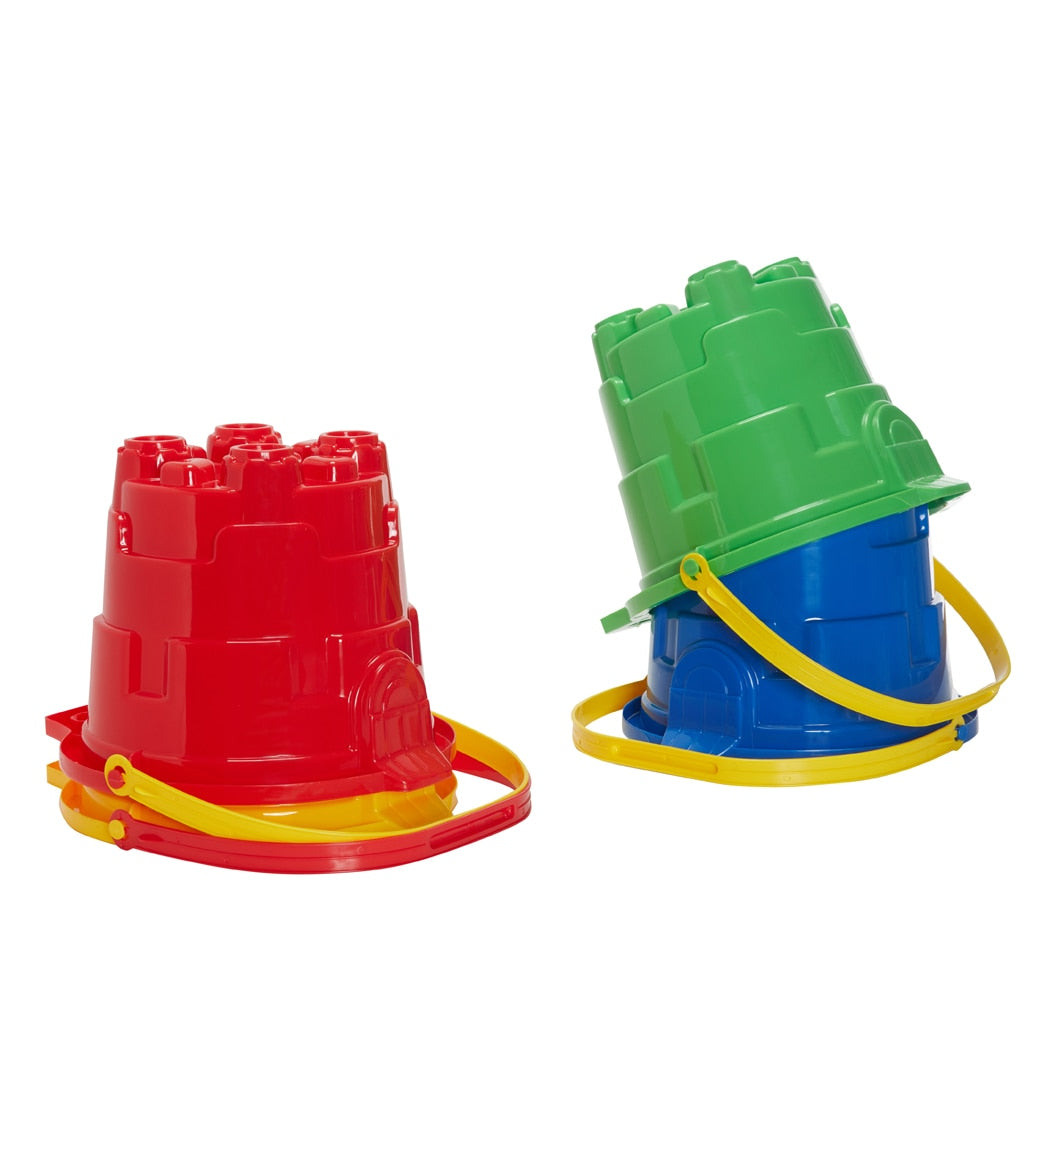 Wet Products Jumbo Castle Mold Bucket 2 Gallon at SwimOutlet.com